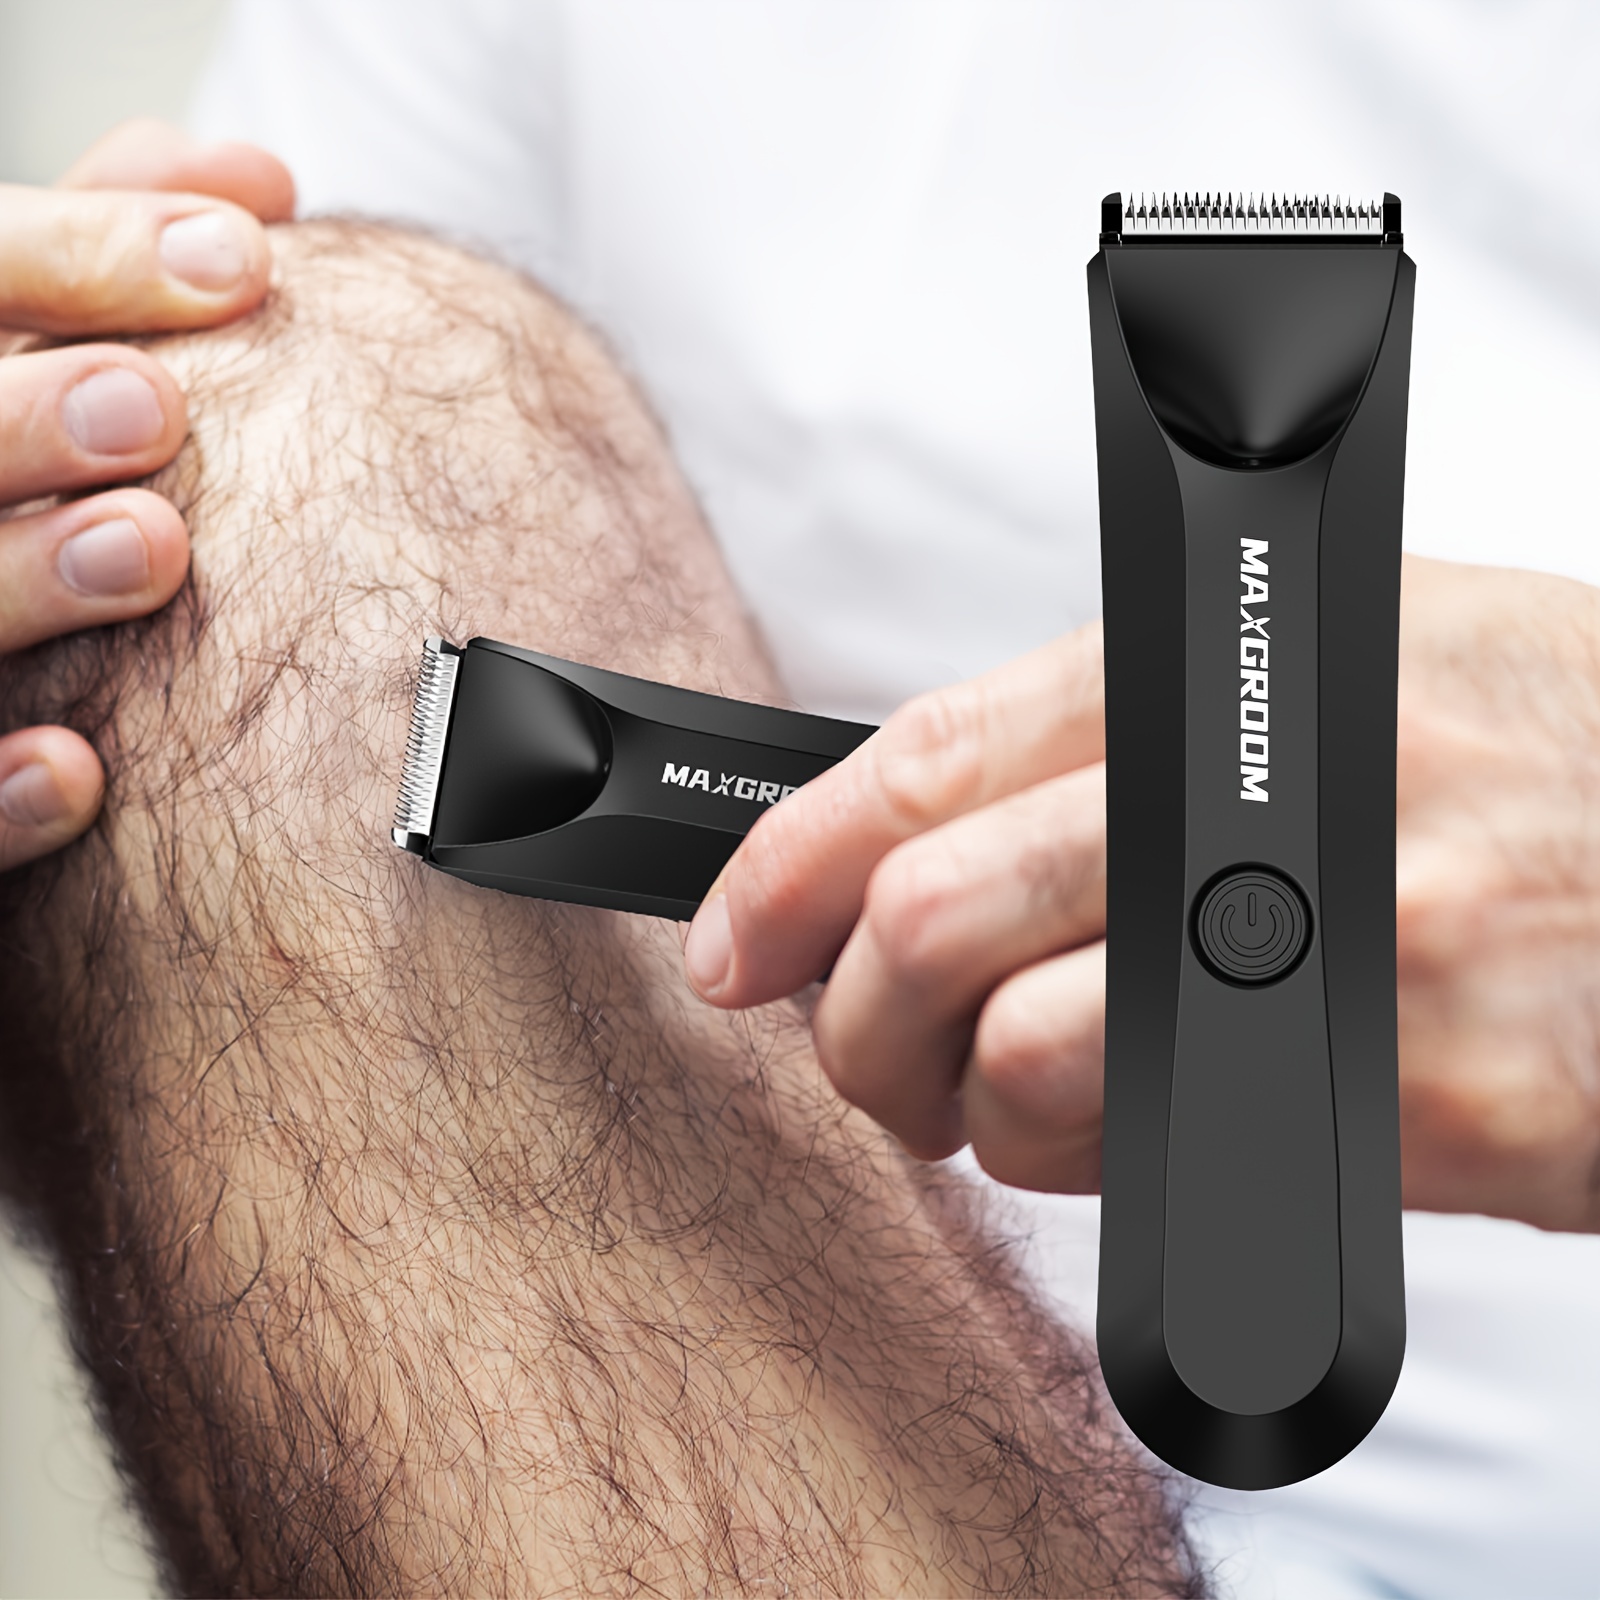 

Body Hair Trimmer For Men, Shaver For Men, Ball Trimmer, Pubic Grooming Device, Gifts For Men, Father's Day Gift